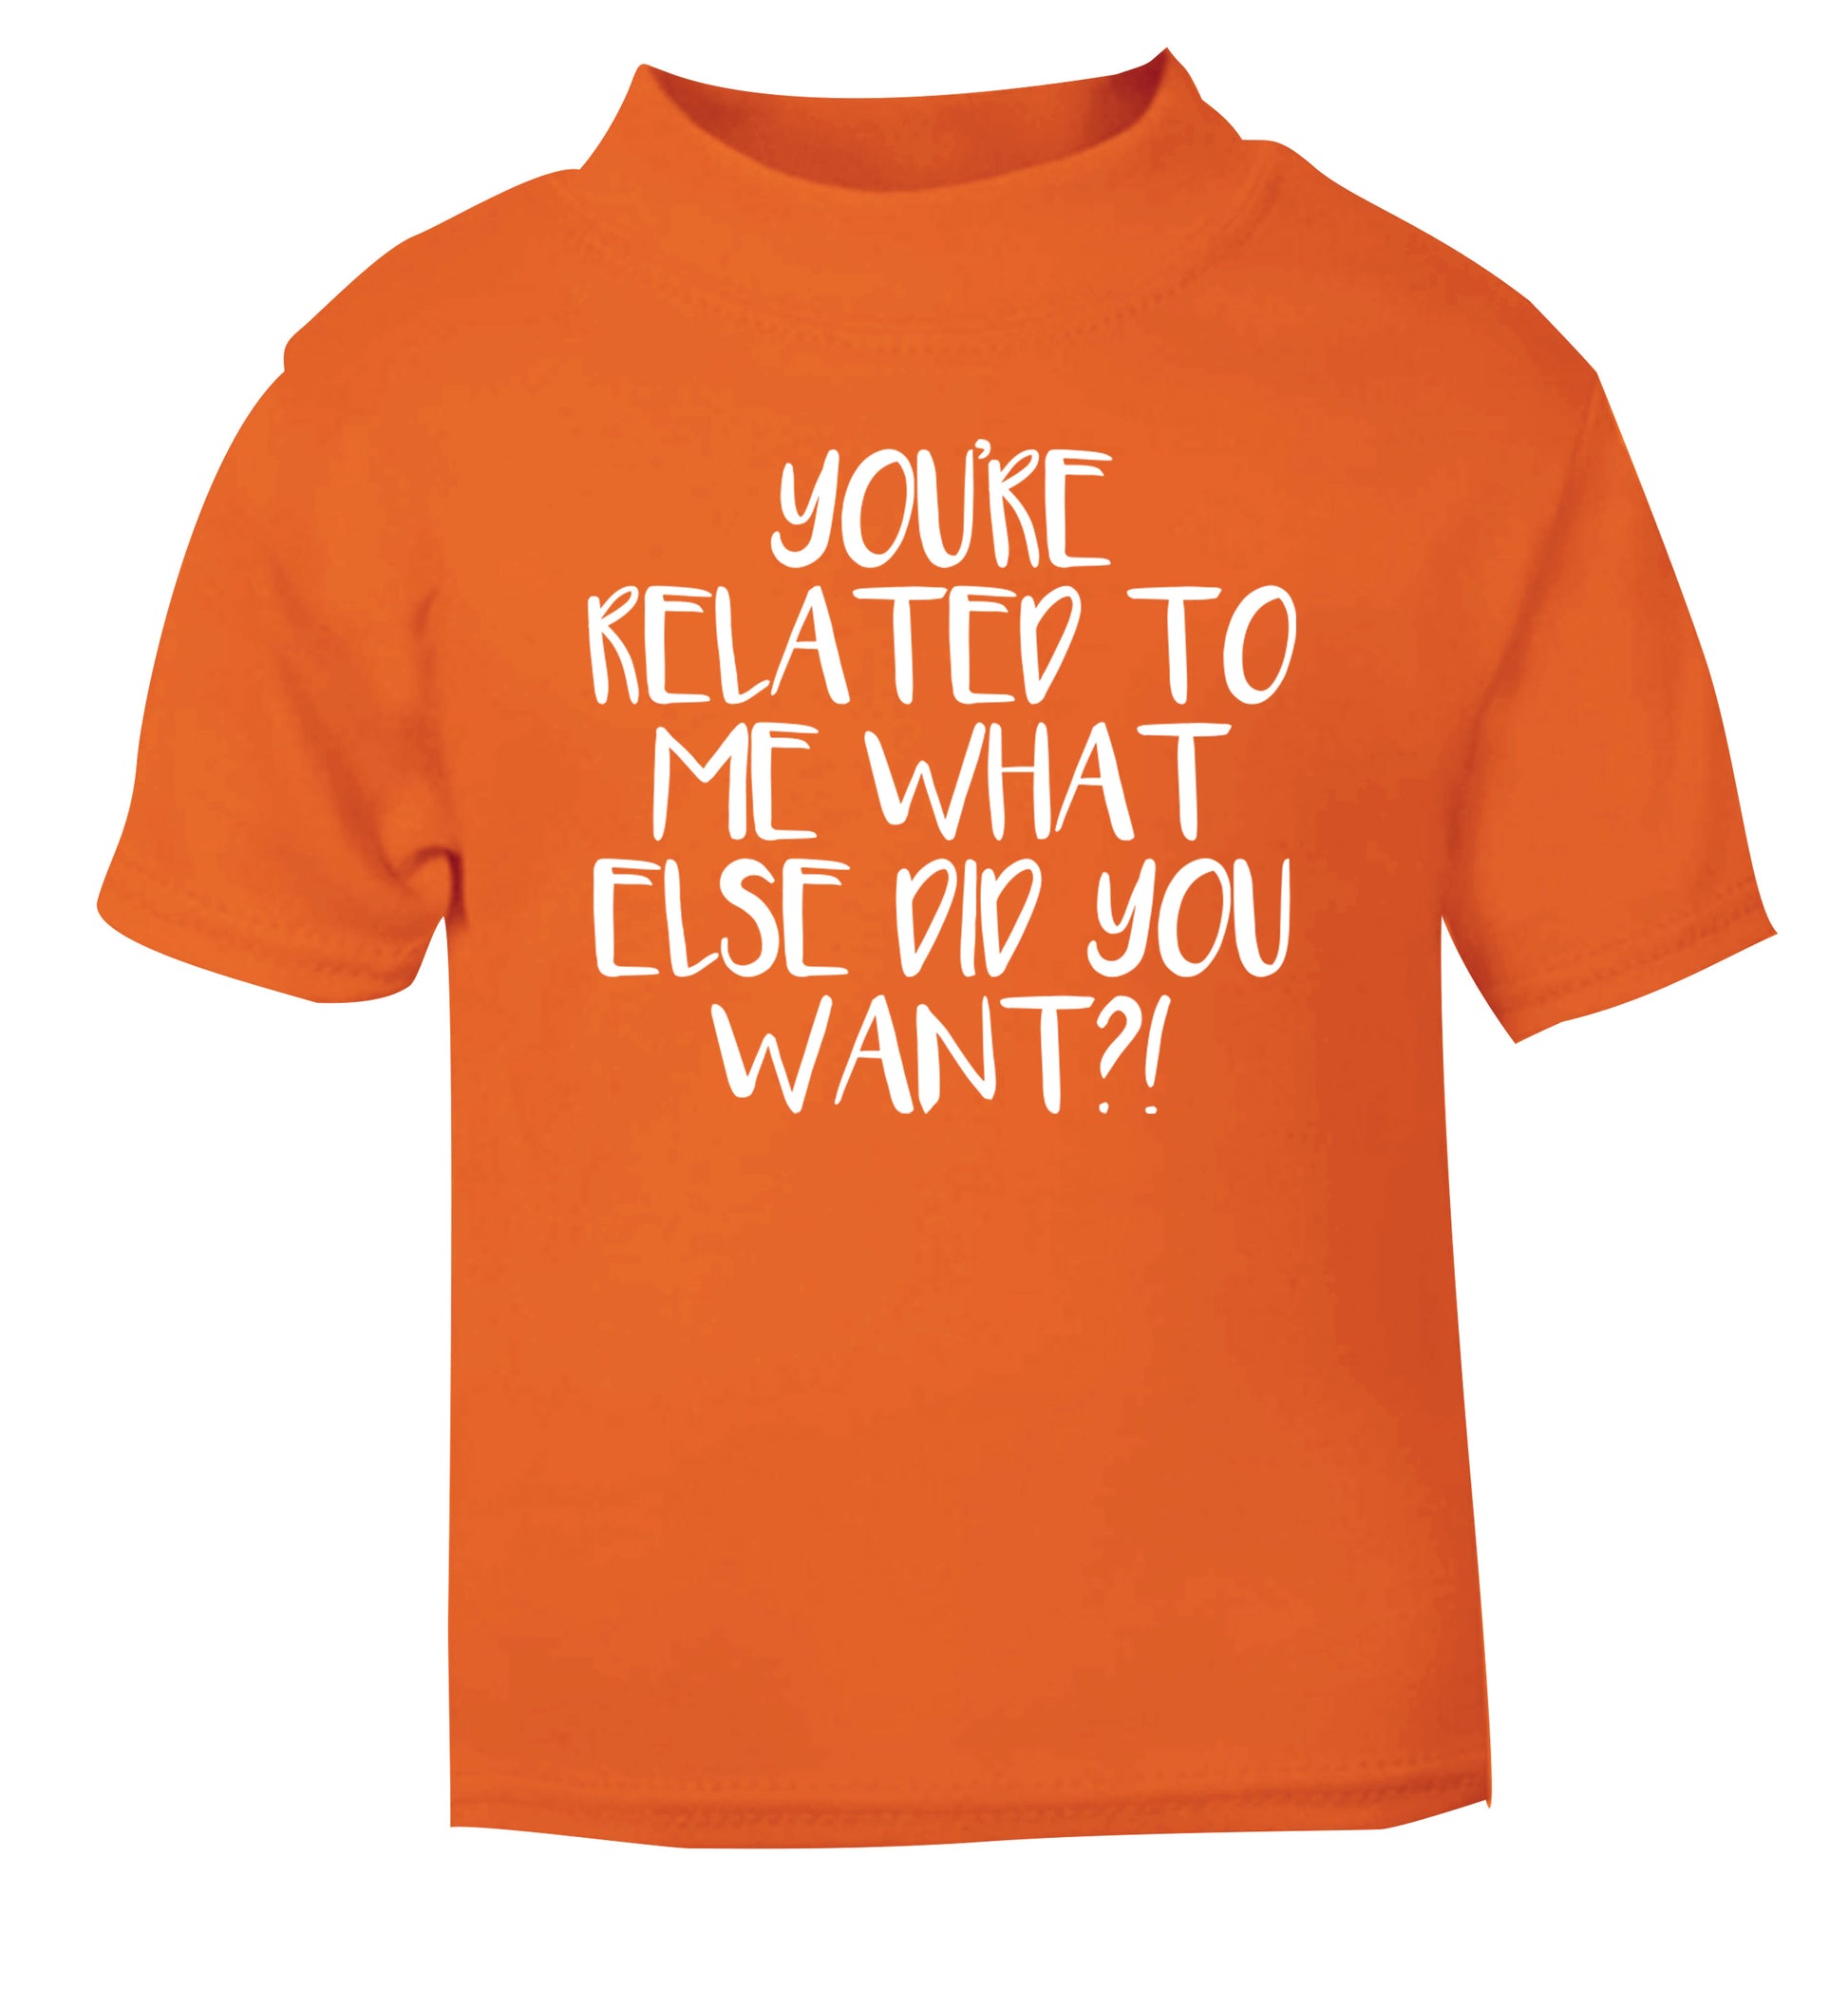 You're related to me what more do you want? orange Baby Toddler Tshirt 2 Years